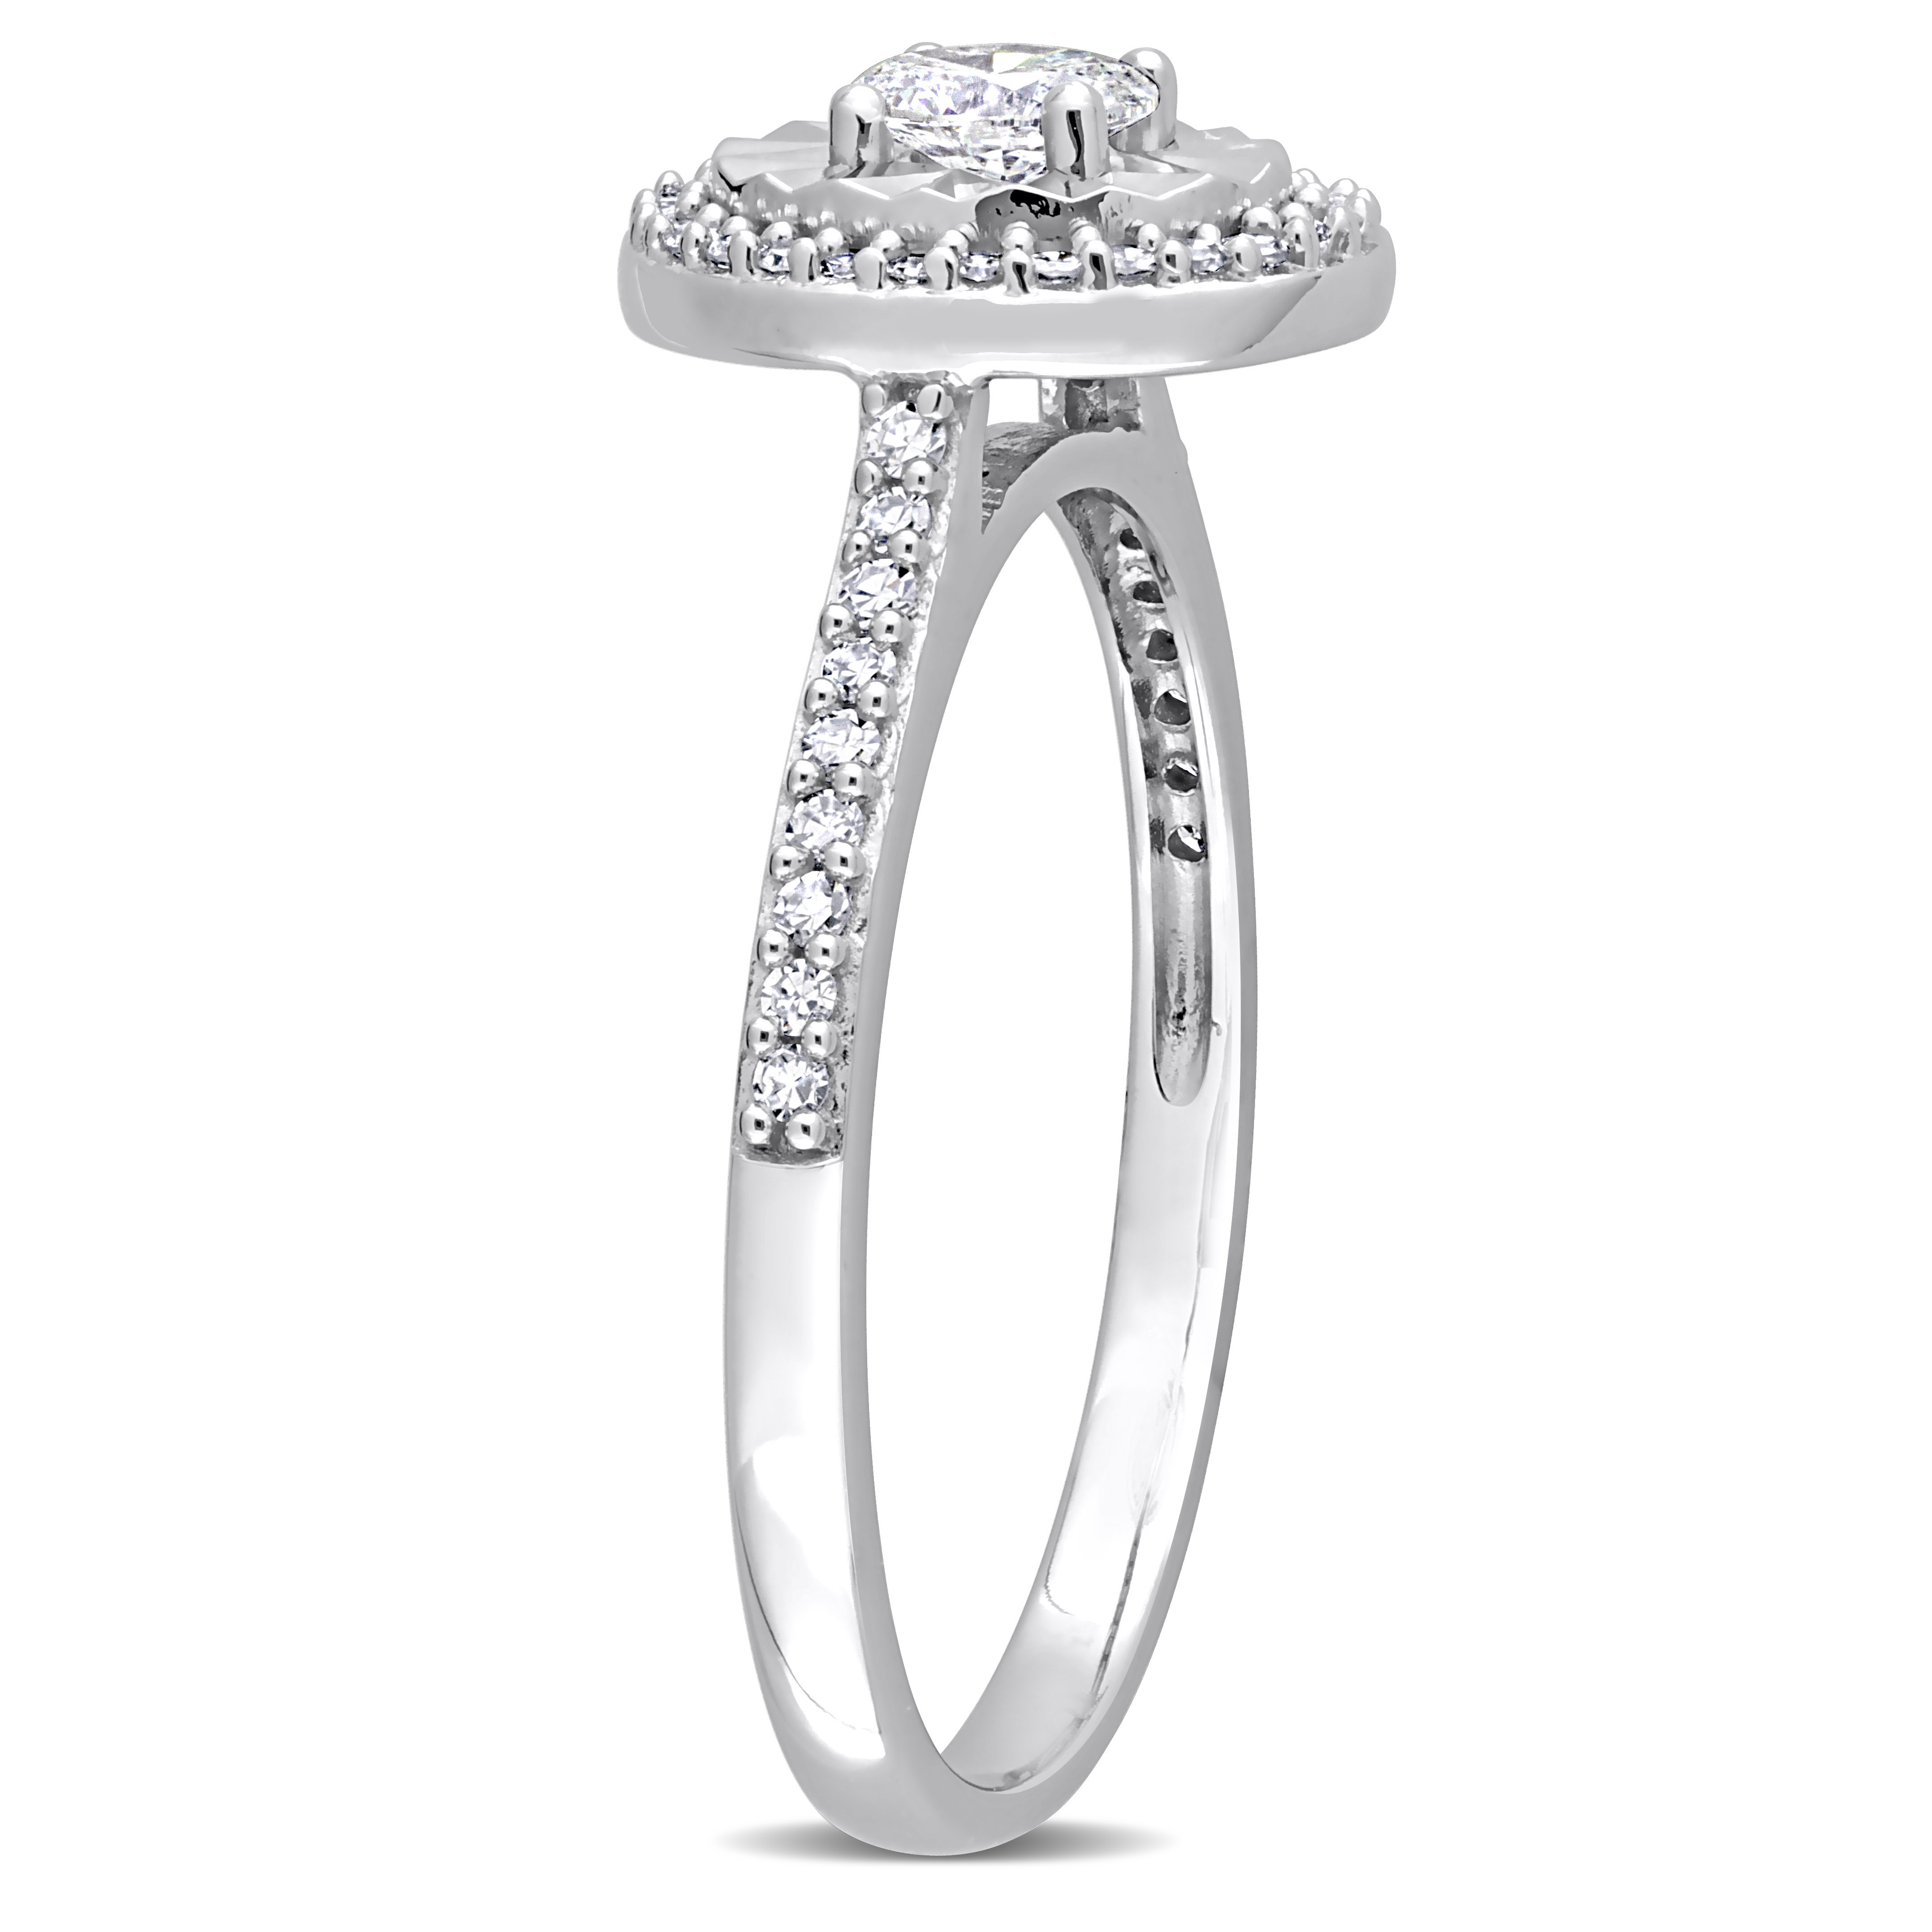 1/3 CT TW Oval and Round-Cut Diamond Ring in 14k White Gold